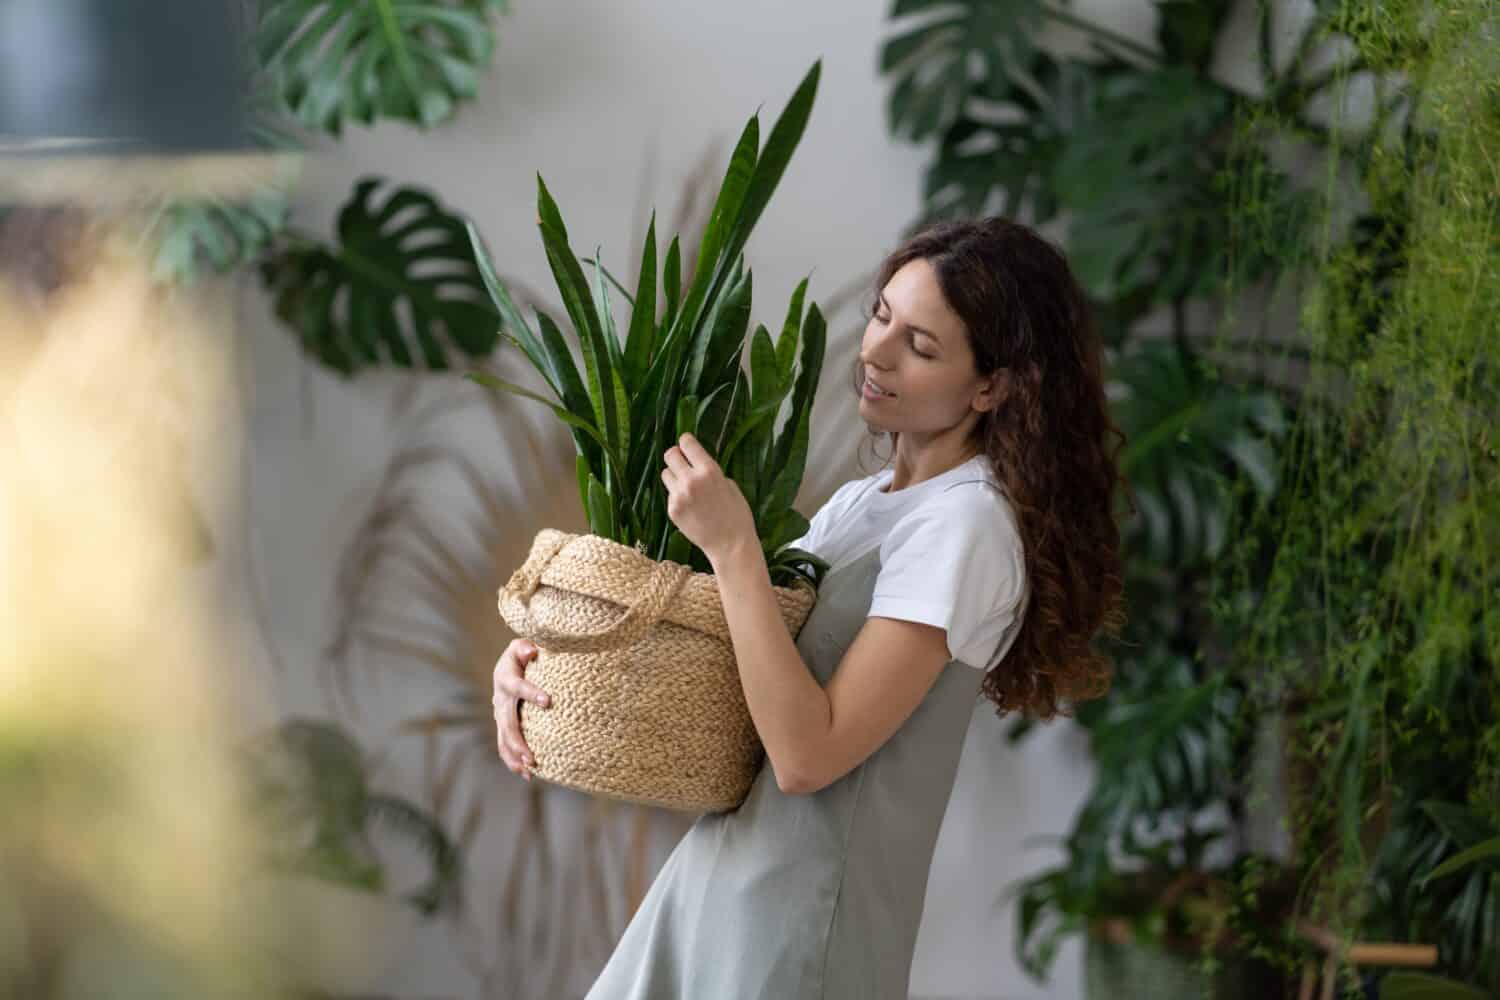 Plant care. Woman florist taking care about snake plant in home garden, holding Sansevieria houseplant in wicker planter and touching green leaves while standing in greenhouse, selective focus